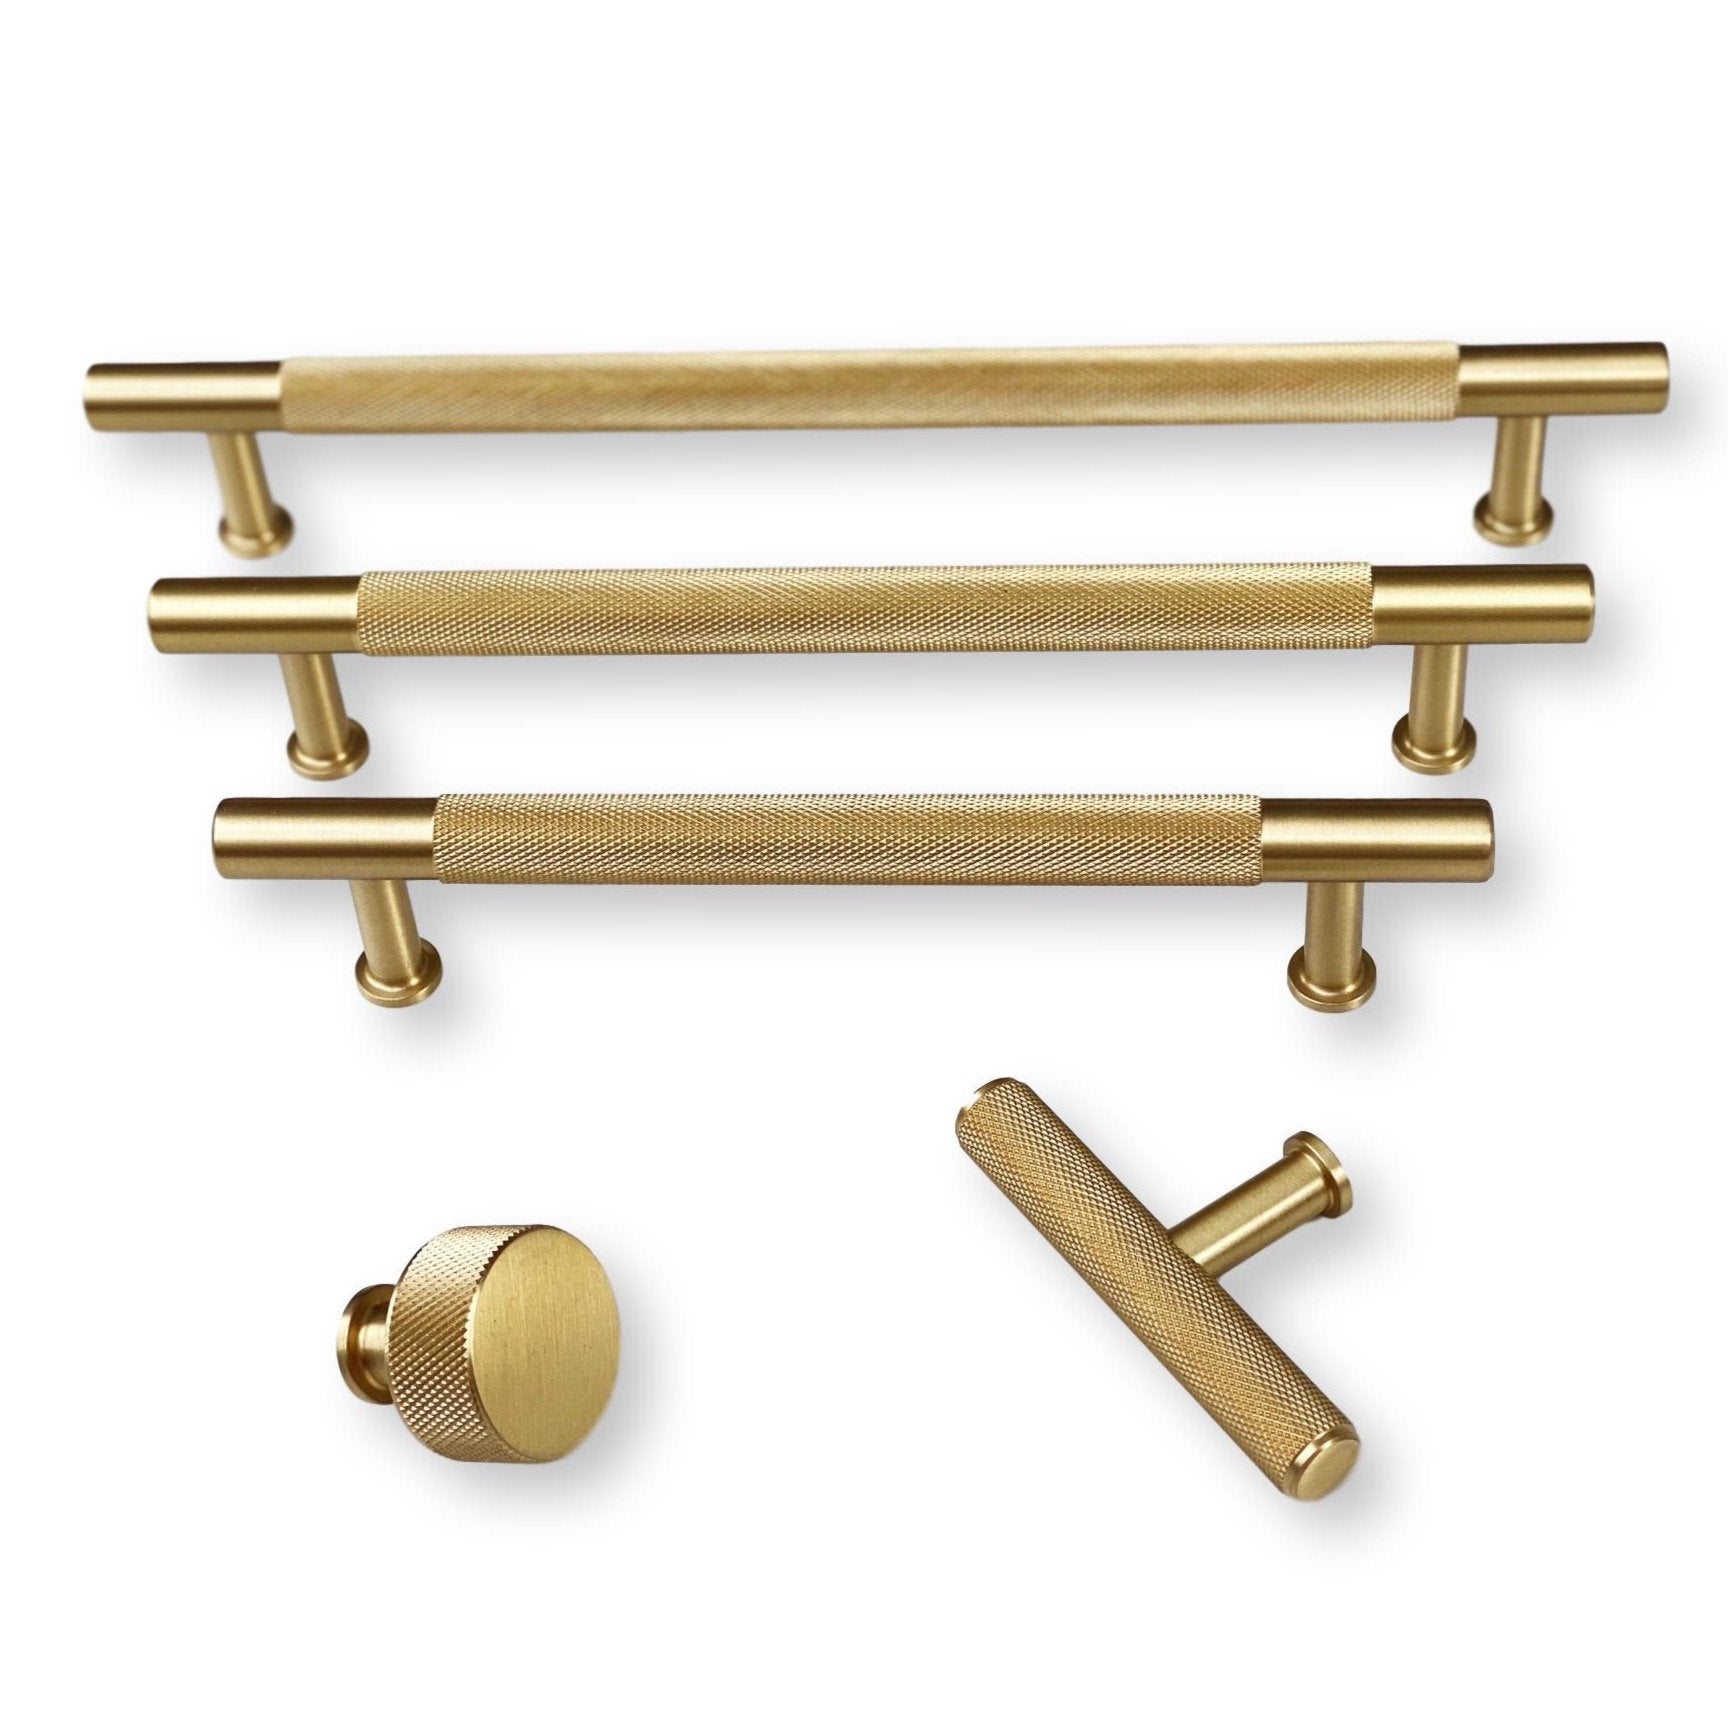 Brass Solid Texture No.2 Knurled Drawer Pulls and Knobs in Satin Bra